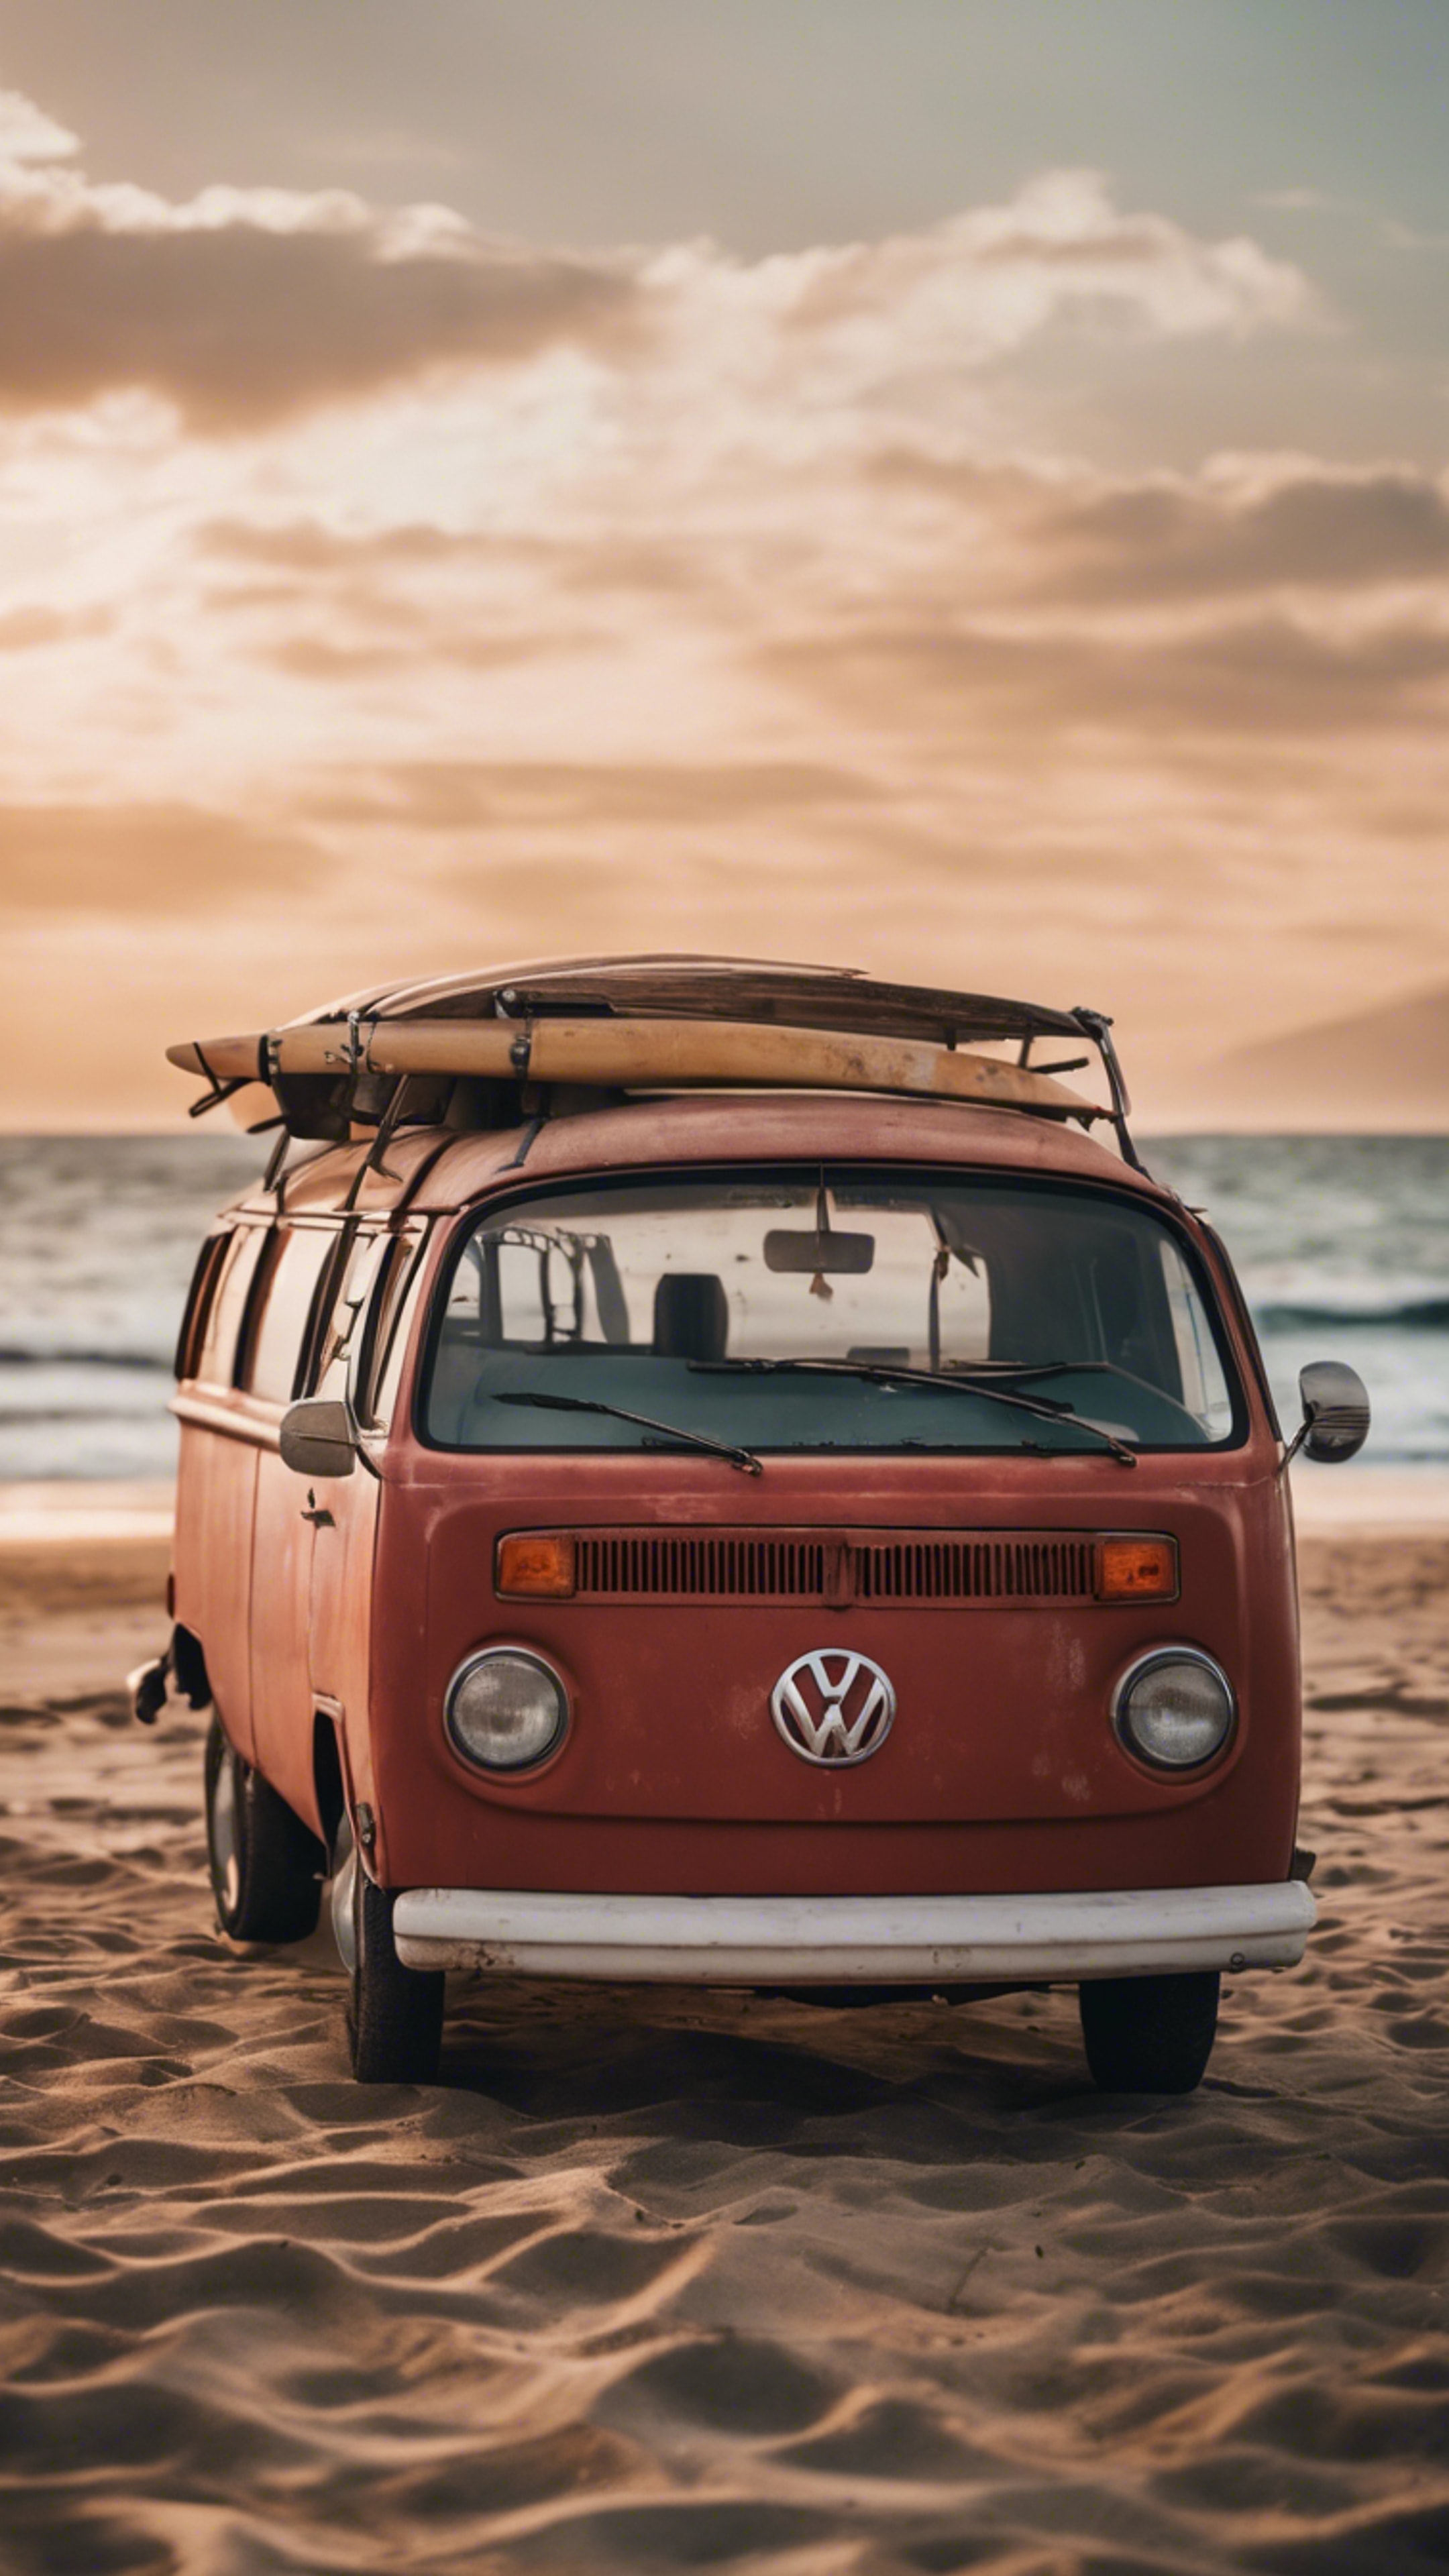 An old, rusted red Volkswagen van parked at a beach with the sunset in the backdrop, surfboards leaning against it. Tapet[f96813b3e584499cadbf]